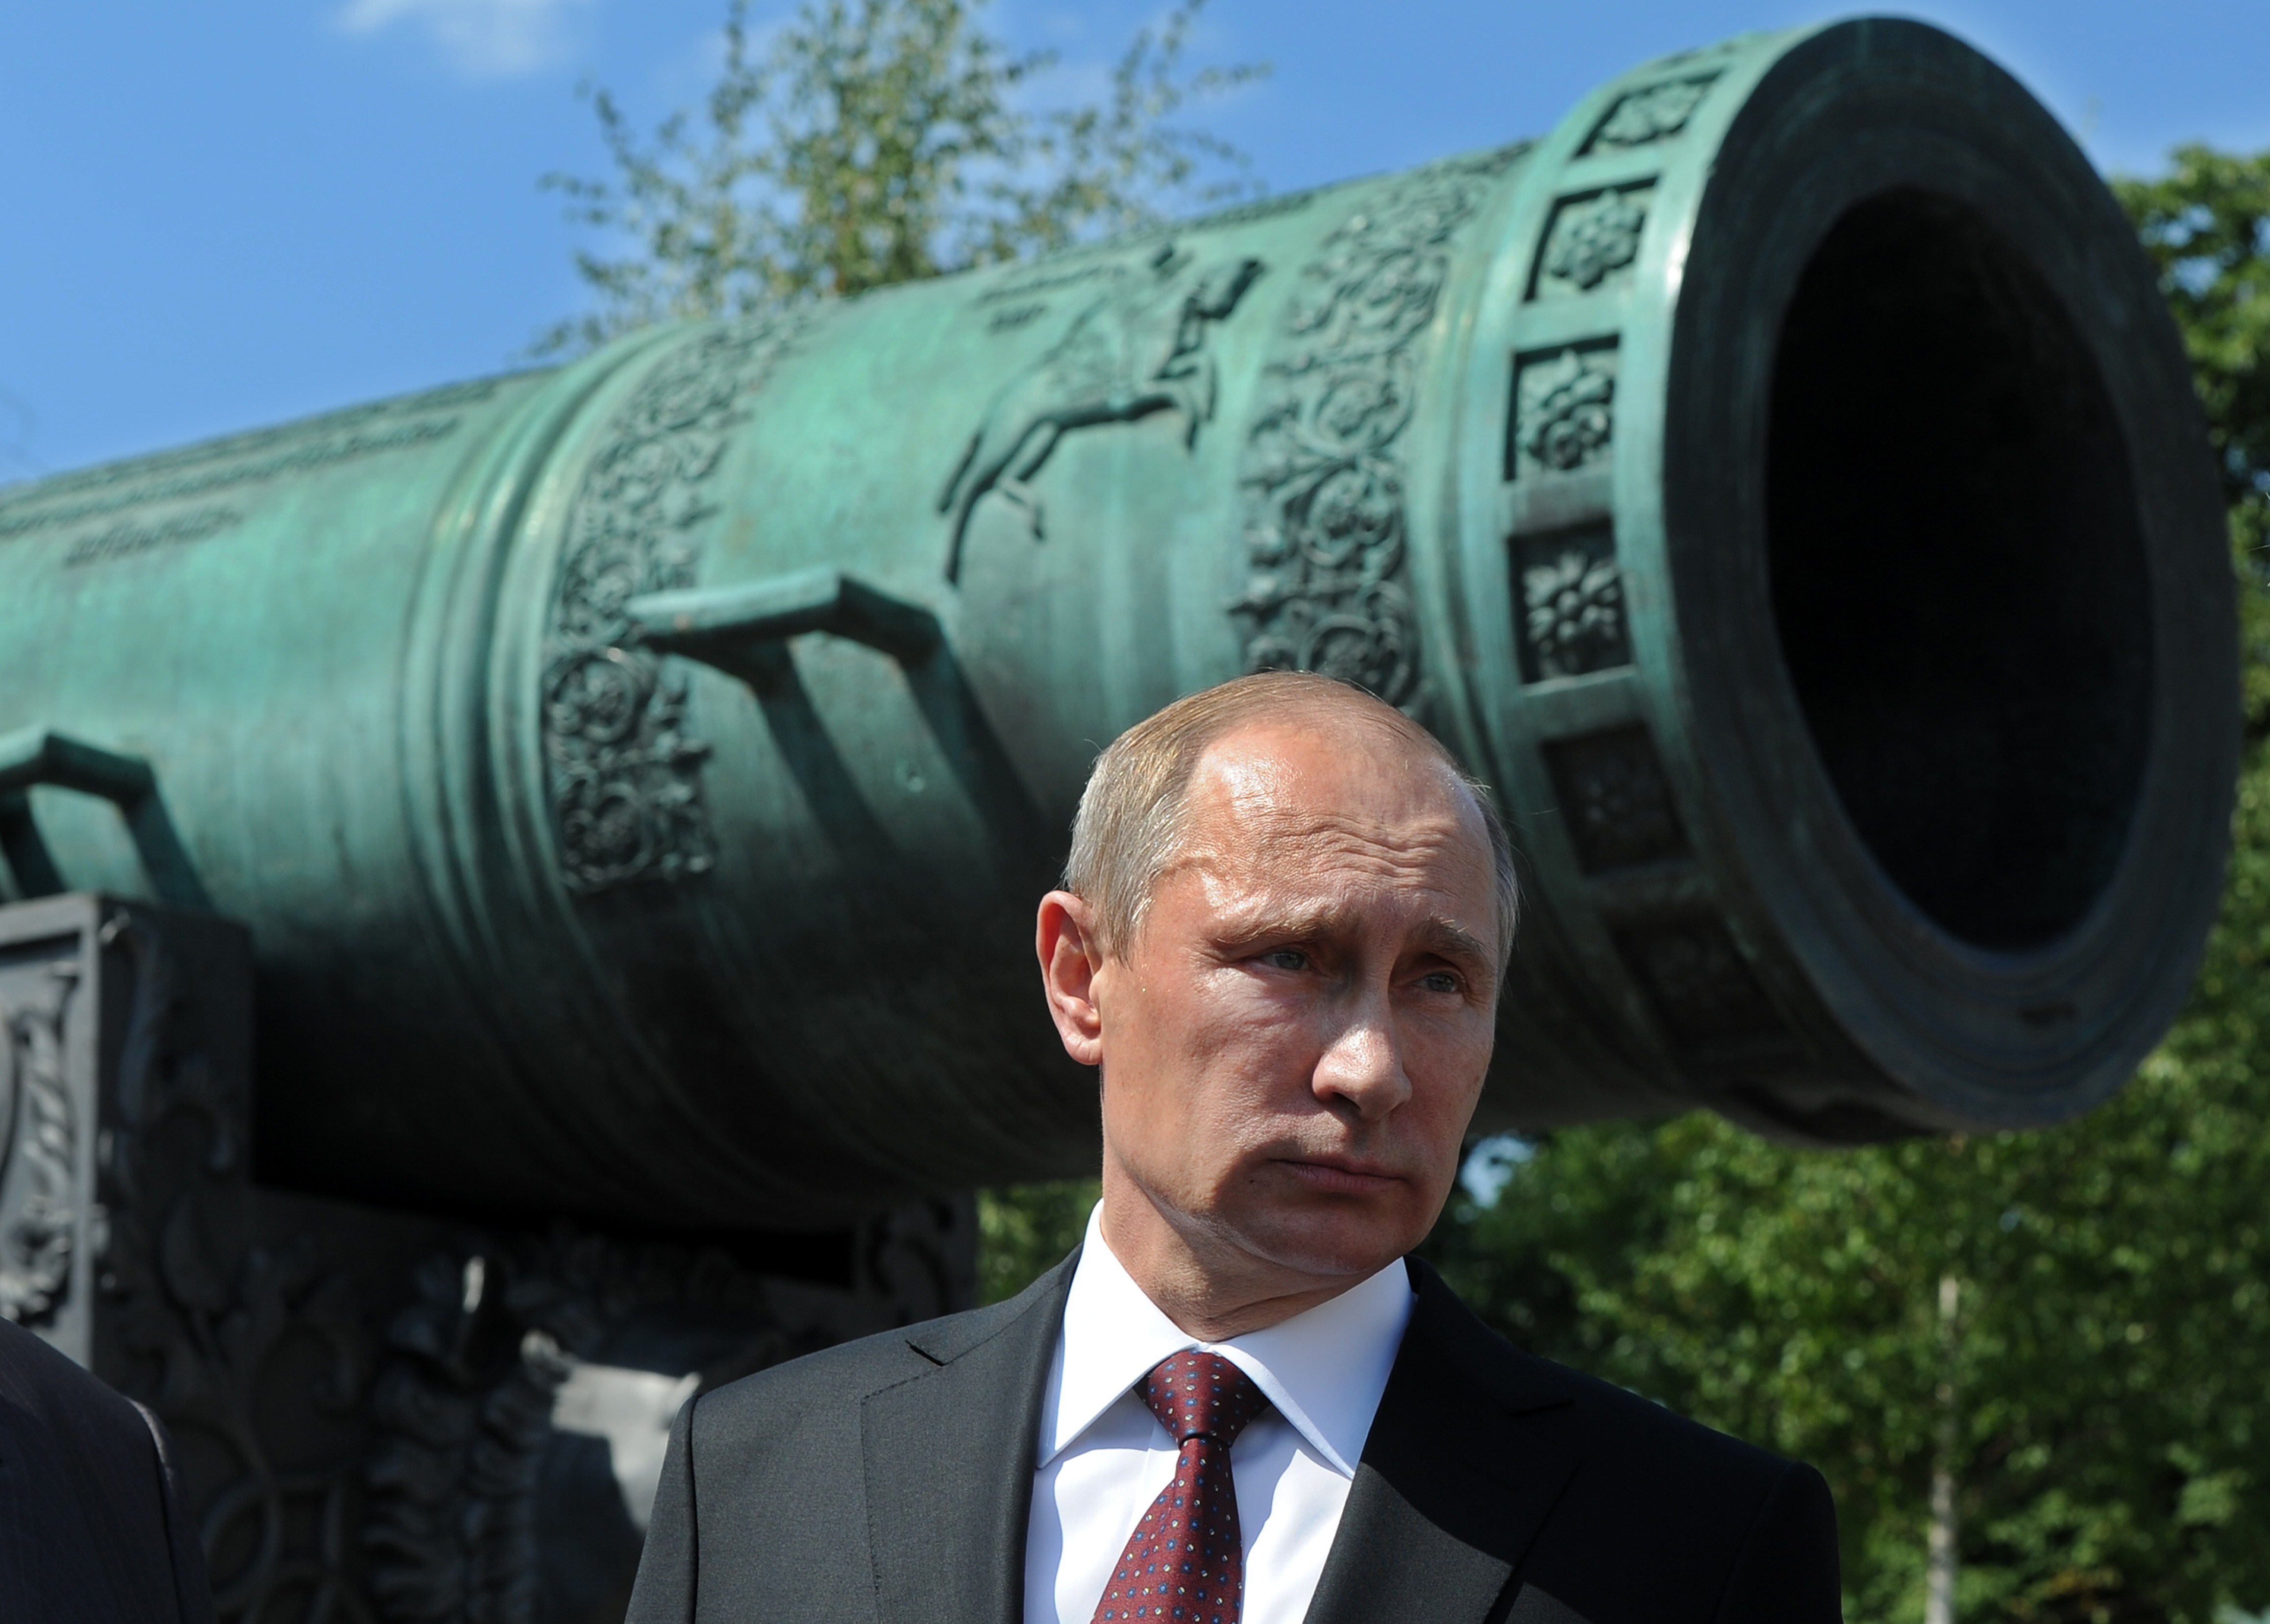 Russia's President Vladimir Putin stands in front of the 6 meters long Tsar Pushka (Tsar Cannon), one of the Russian landmarks displayed in the Kremlin in Moscow, on July 31, 2014. (MIKHAIL KLIMENTYEV&mdash;AFP/Getty Images)